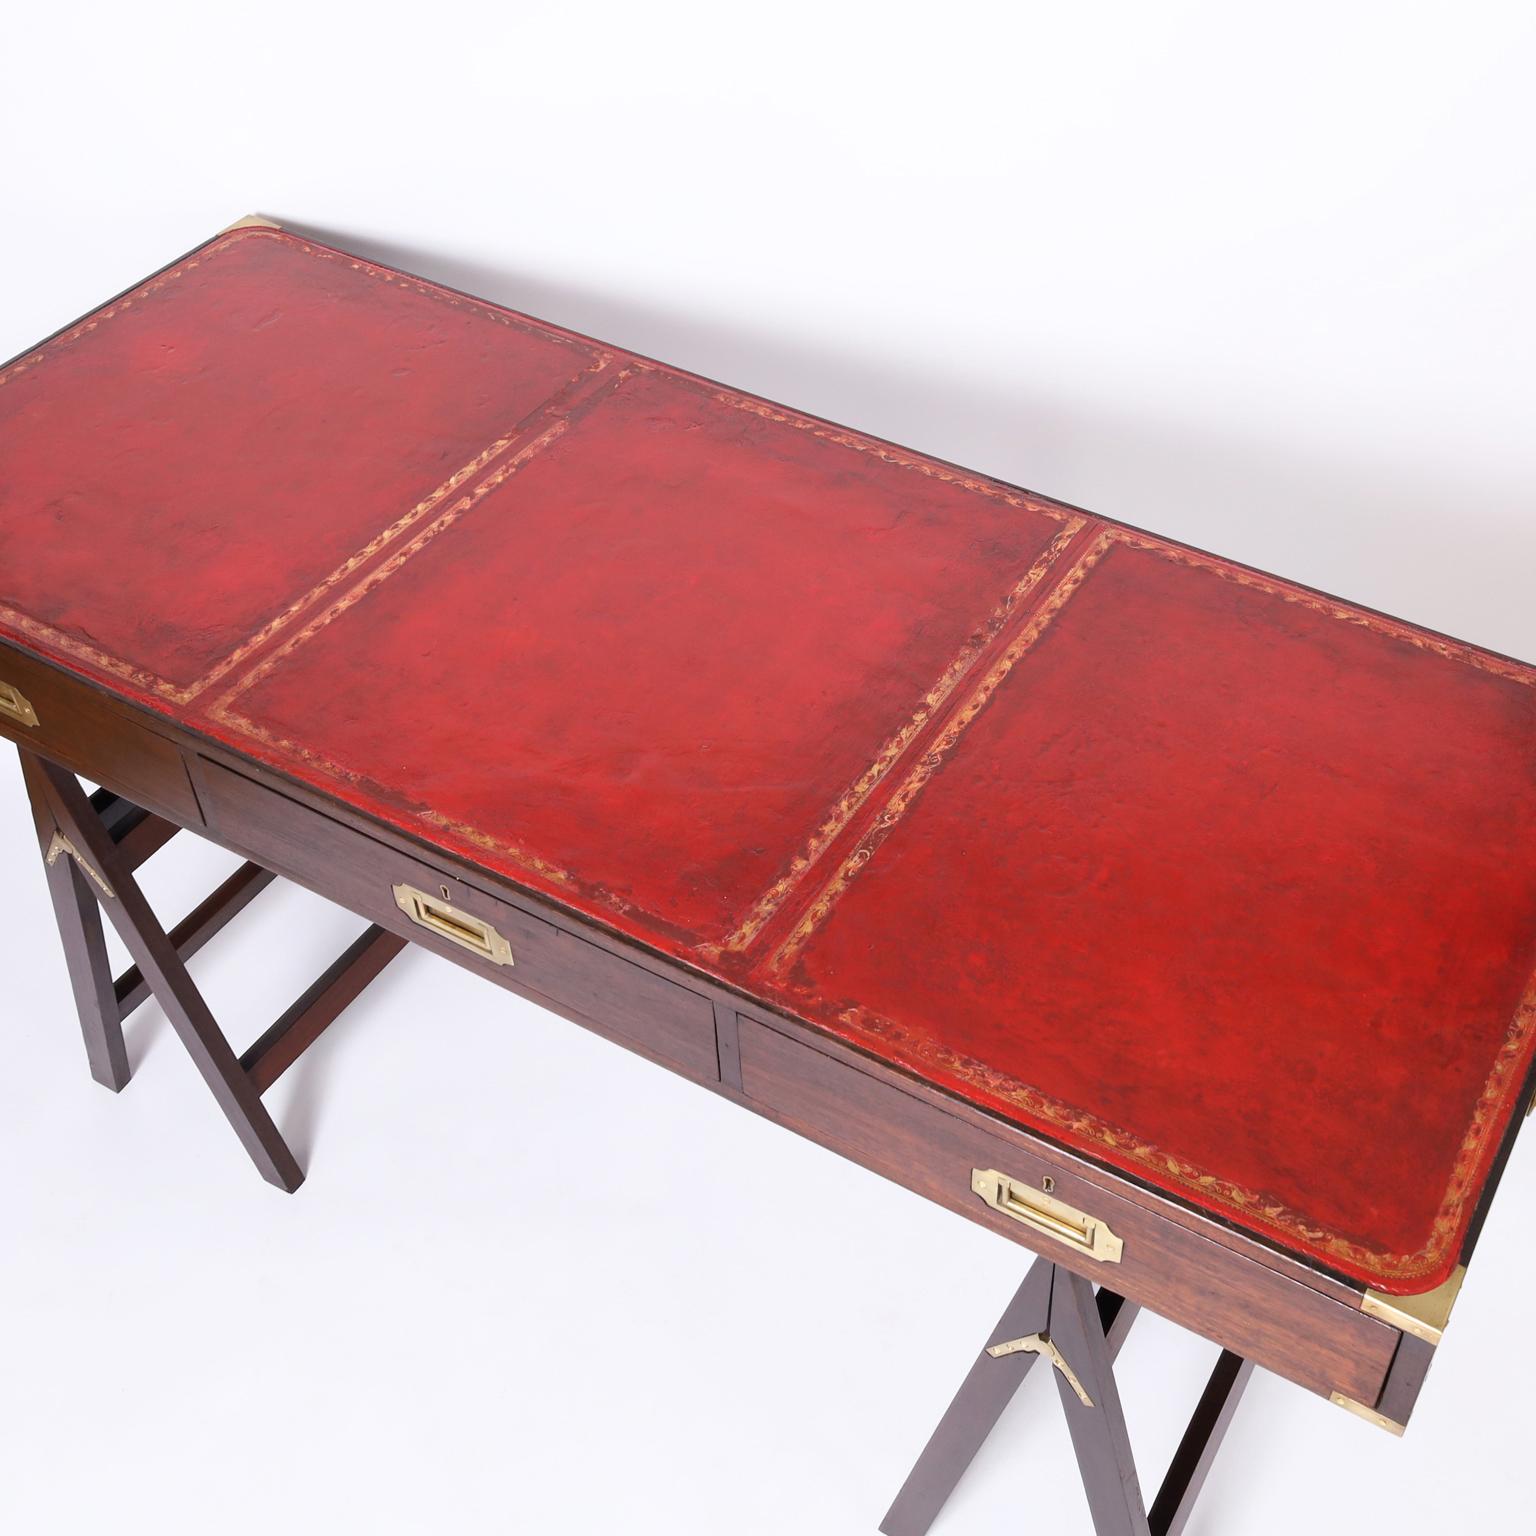 Brass Antique English Sawhorse Style Leather Top Campaign Desk